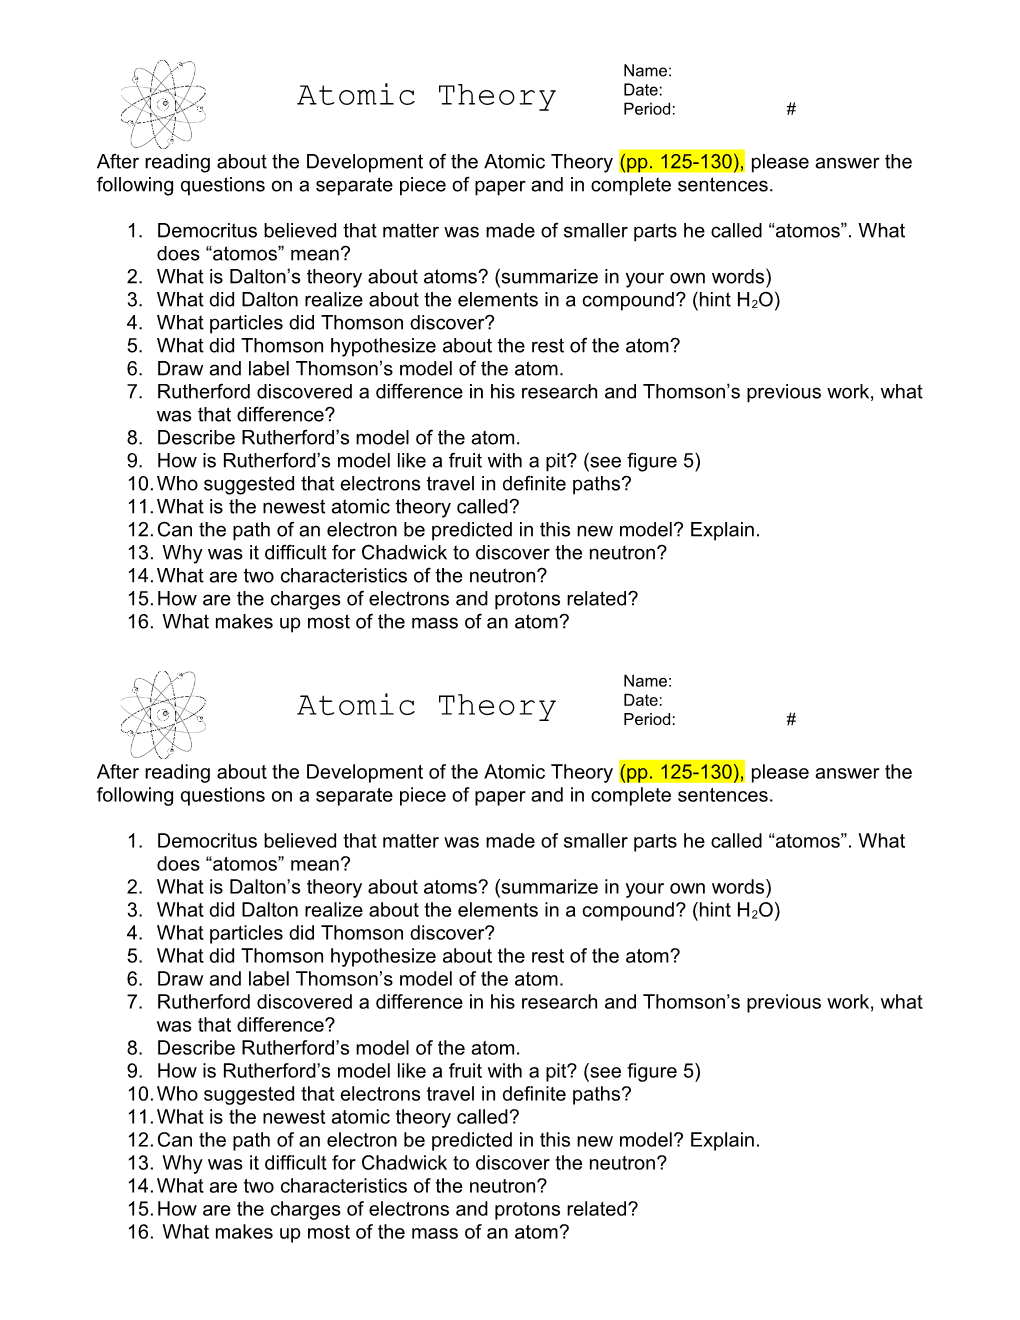 After Reading About the History of the Atomic Theory, Please Answer the Following Questions